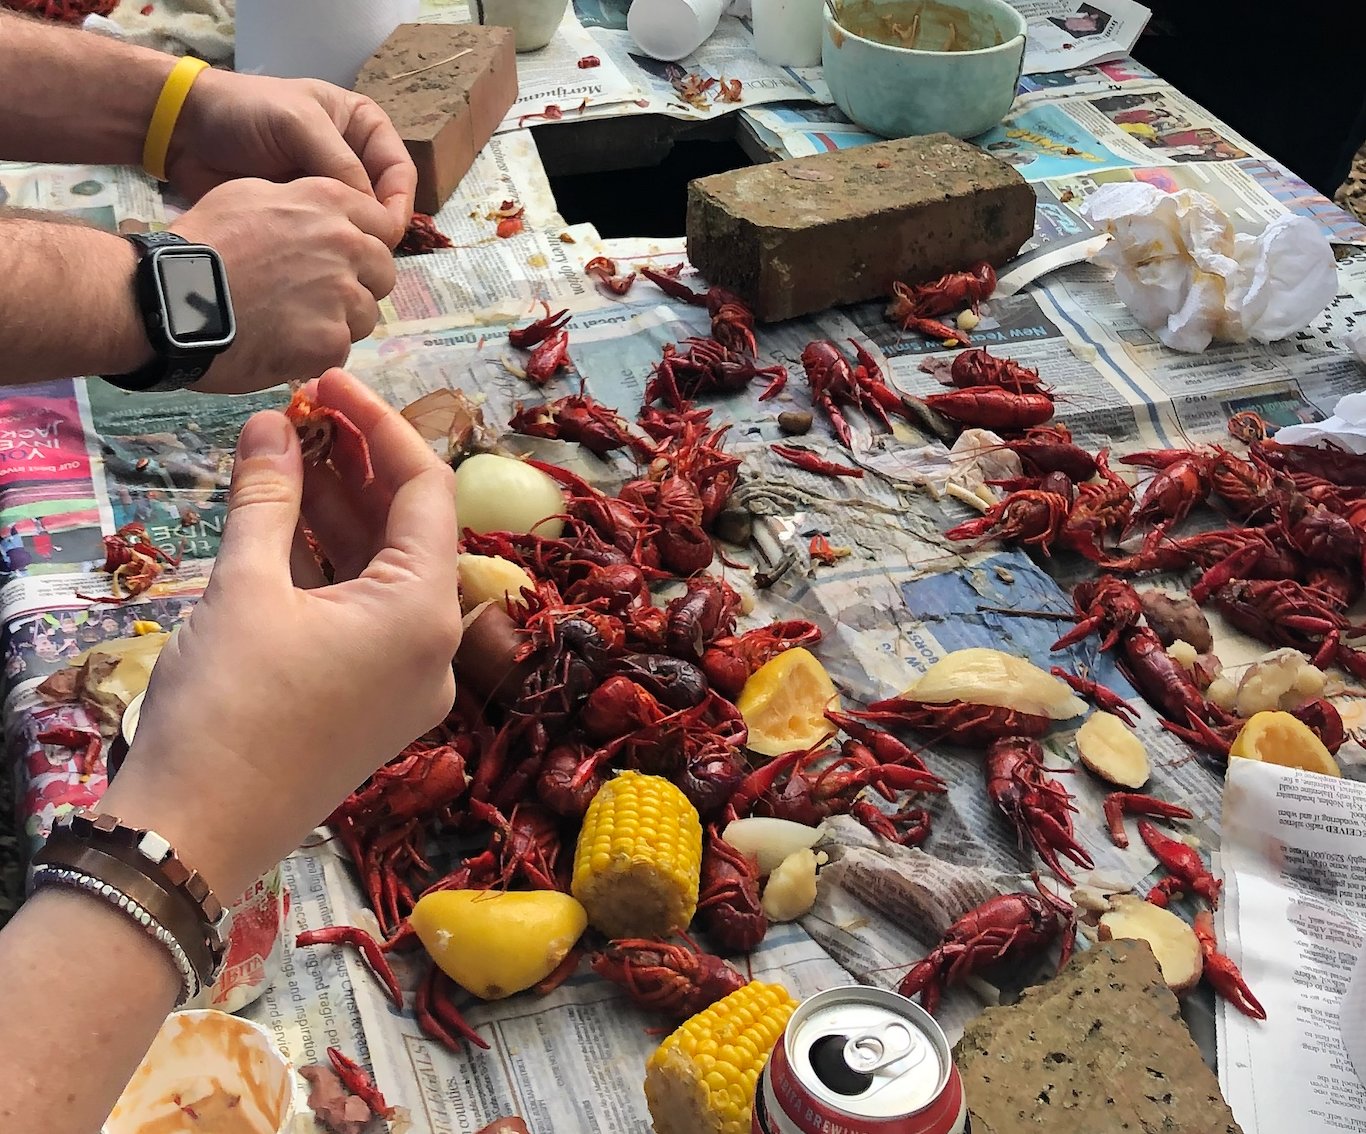 Crawfish boils are a Southern staple and are a great way to enjoy food and fellowship.